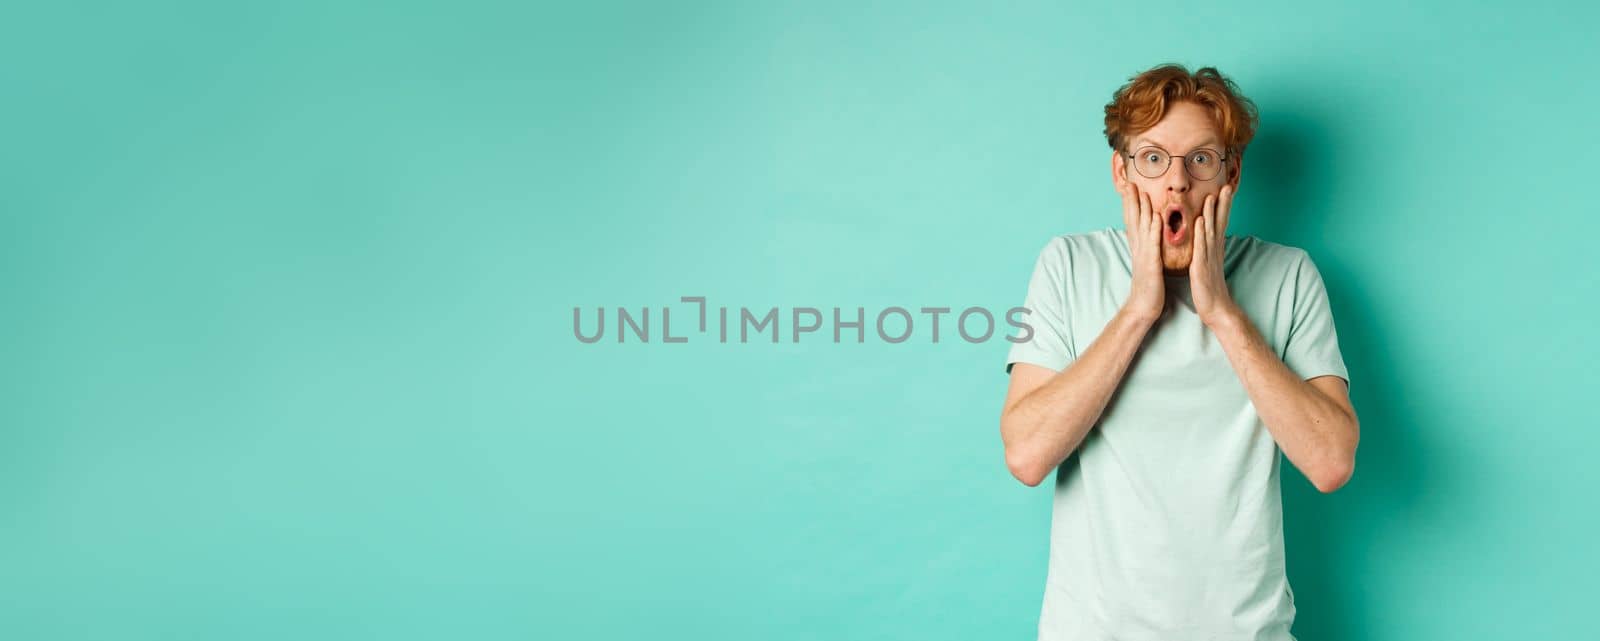 Shocked redhead guy in glasses checking out awesome promotion offer, gasping amazed and holding hands on face, staring at camera, mint background.